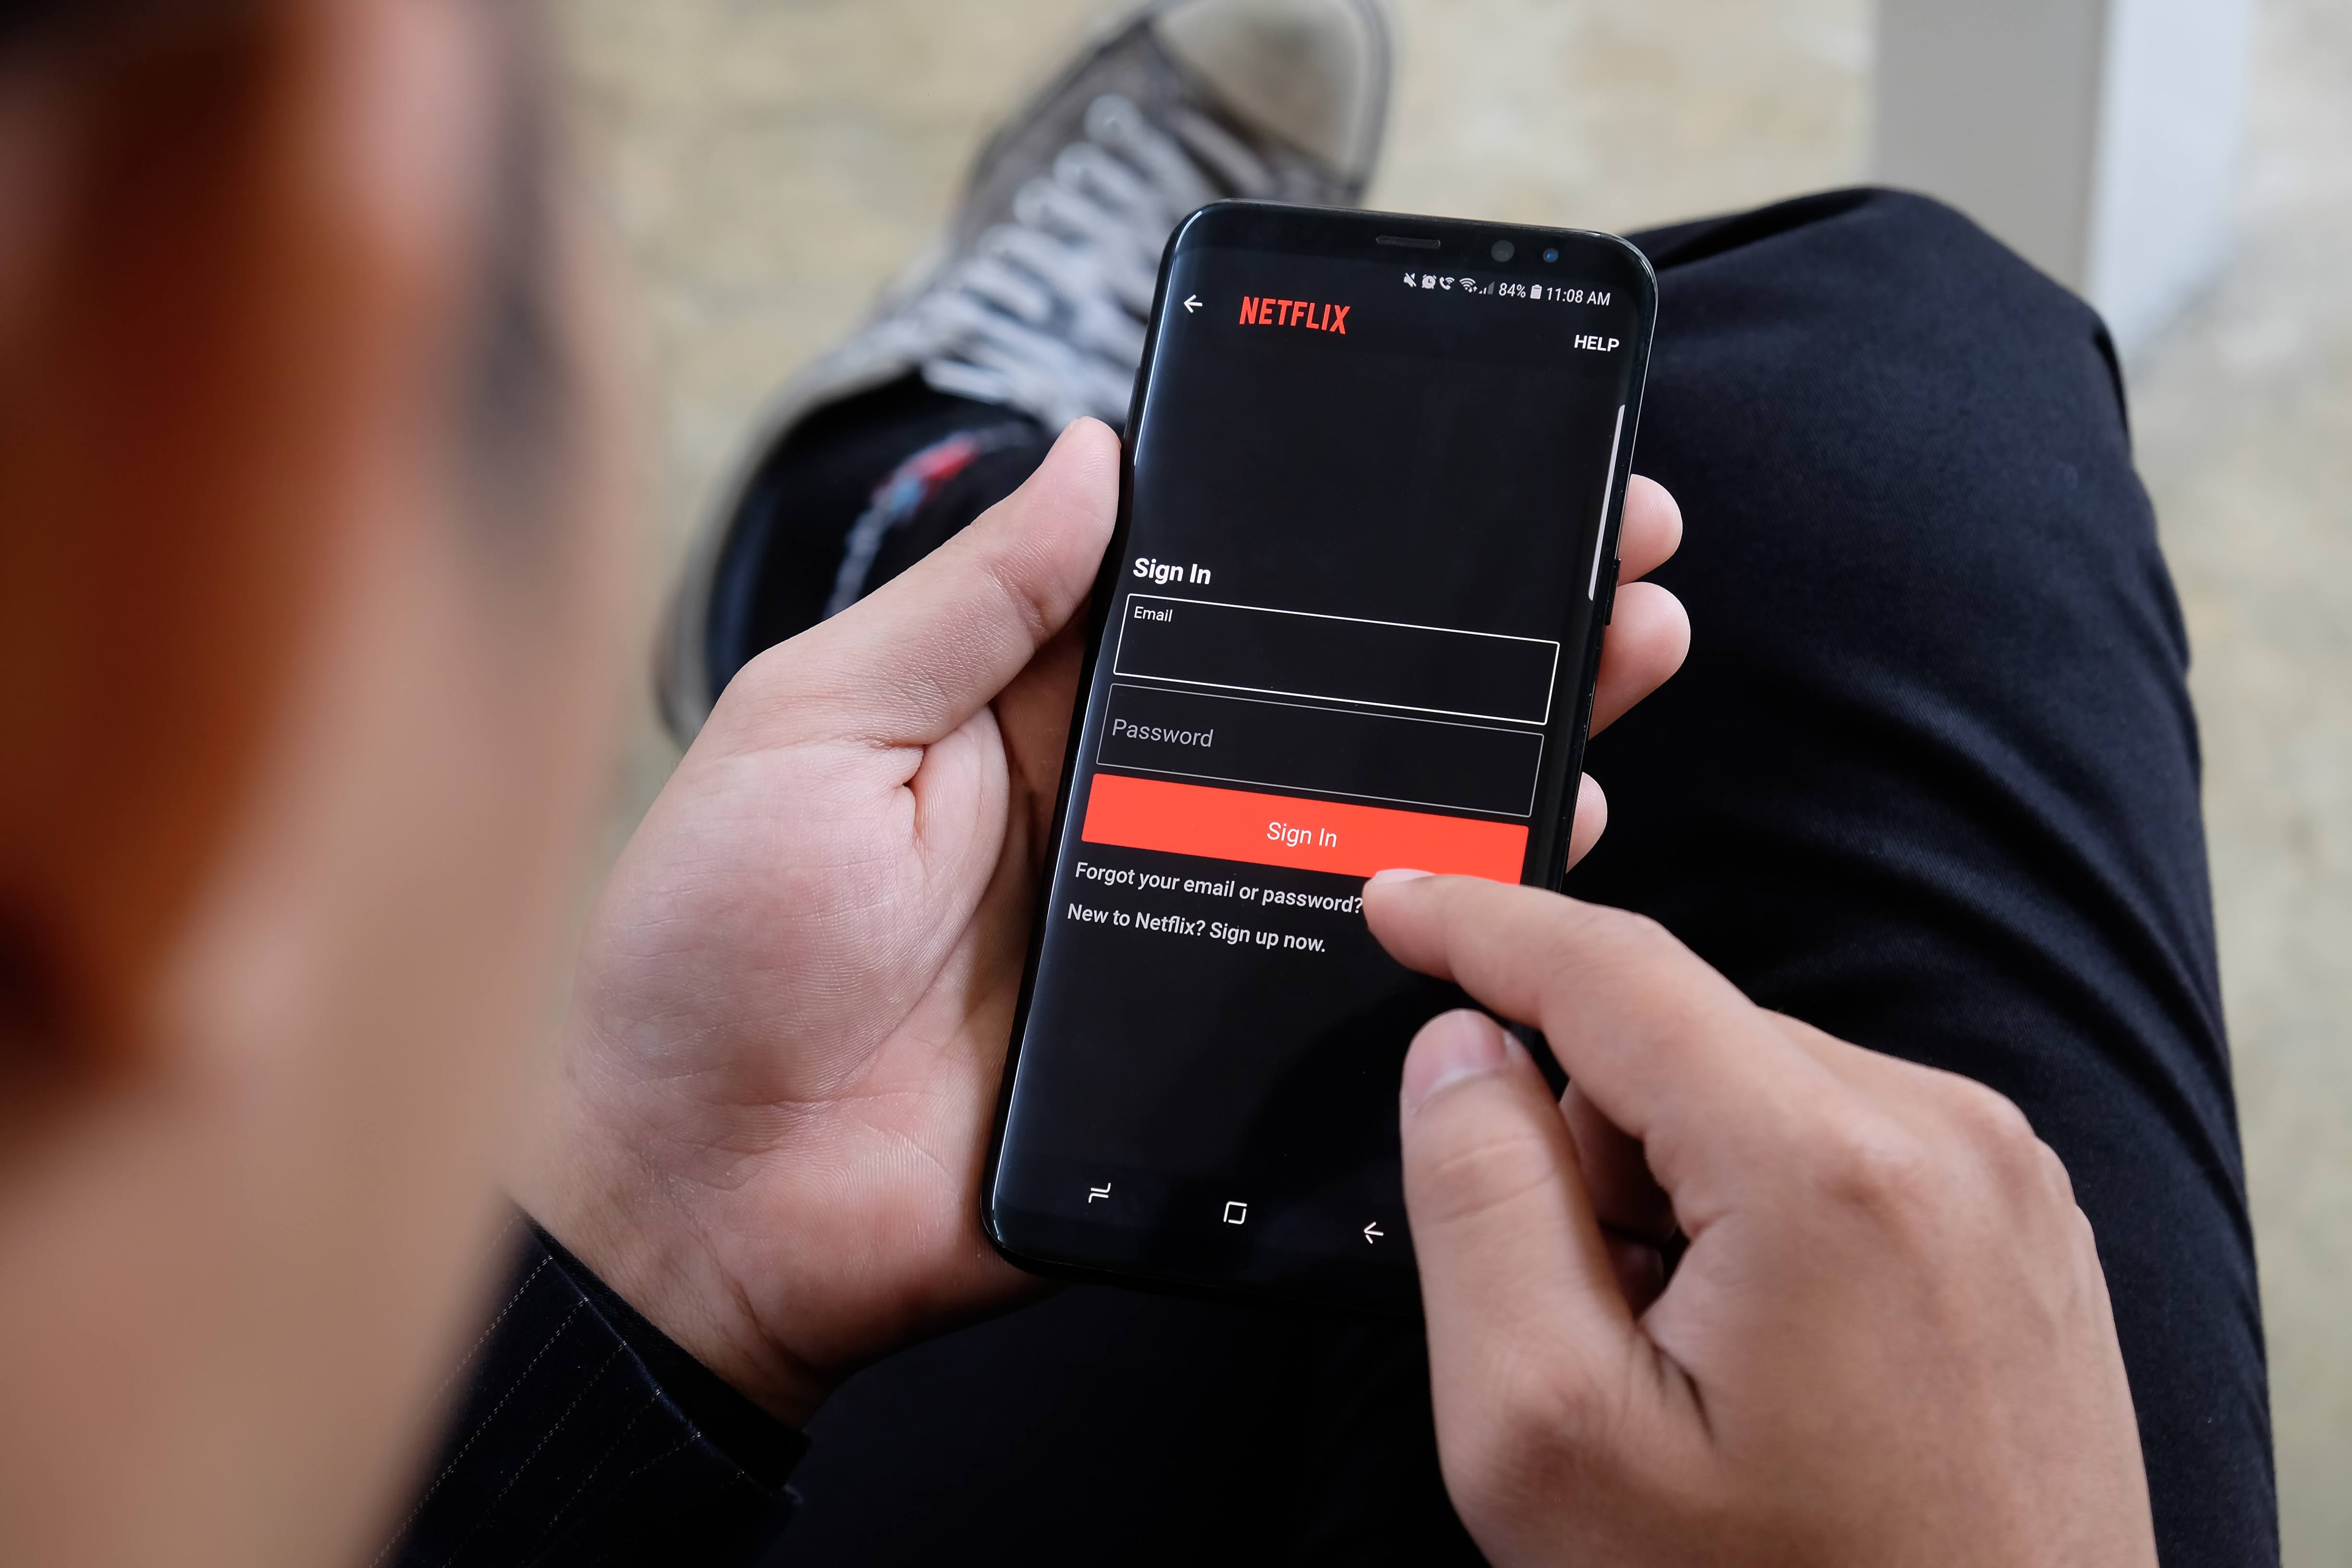 Netflix’s Approach to Curb Password Sharing Won’t be Too Aggressive